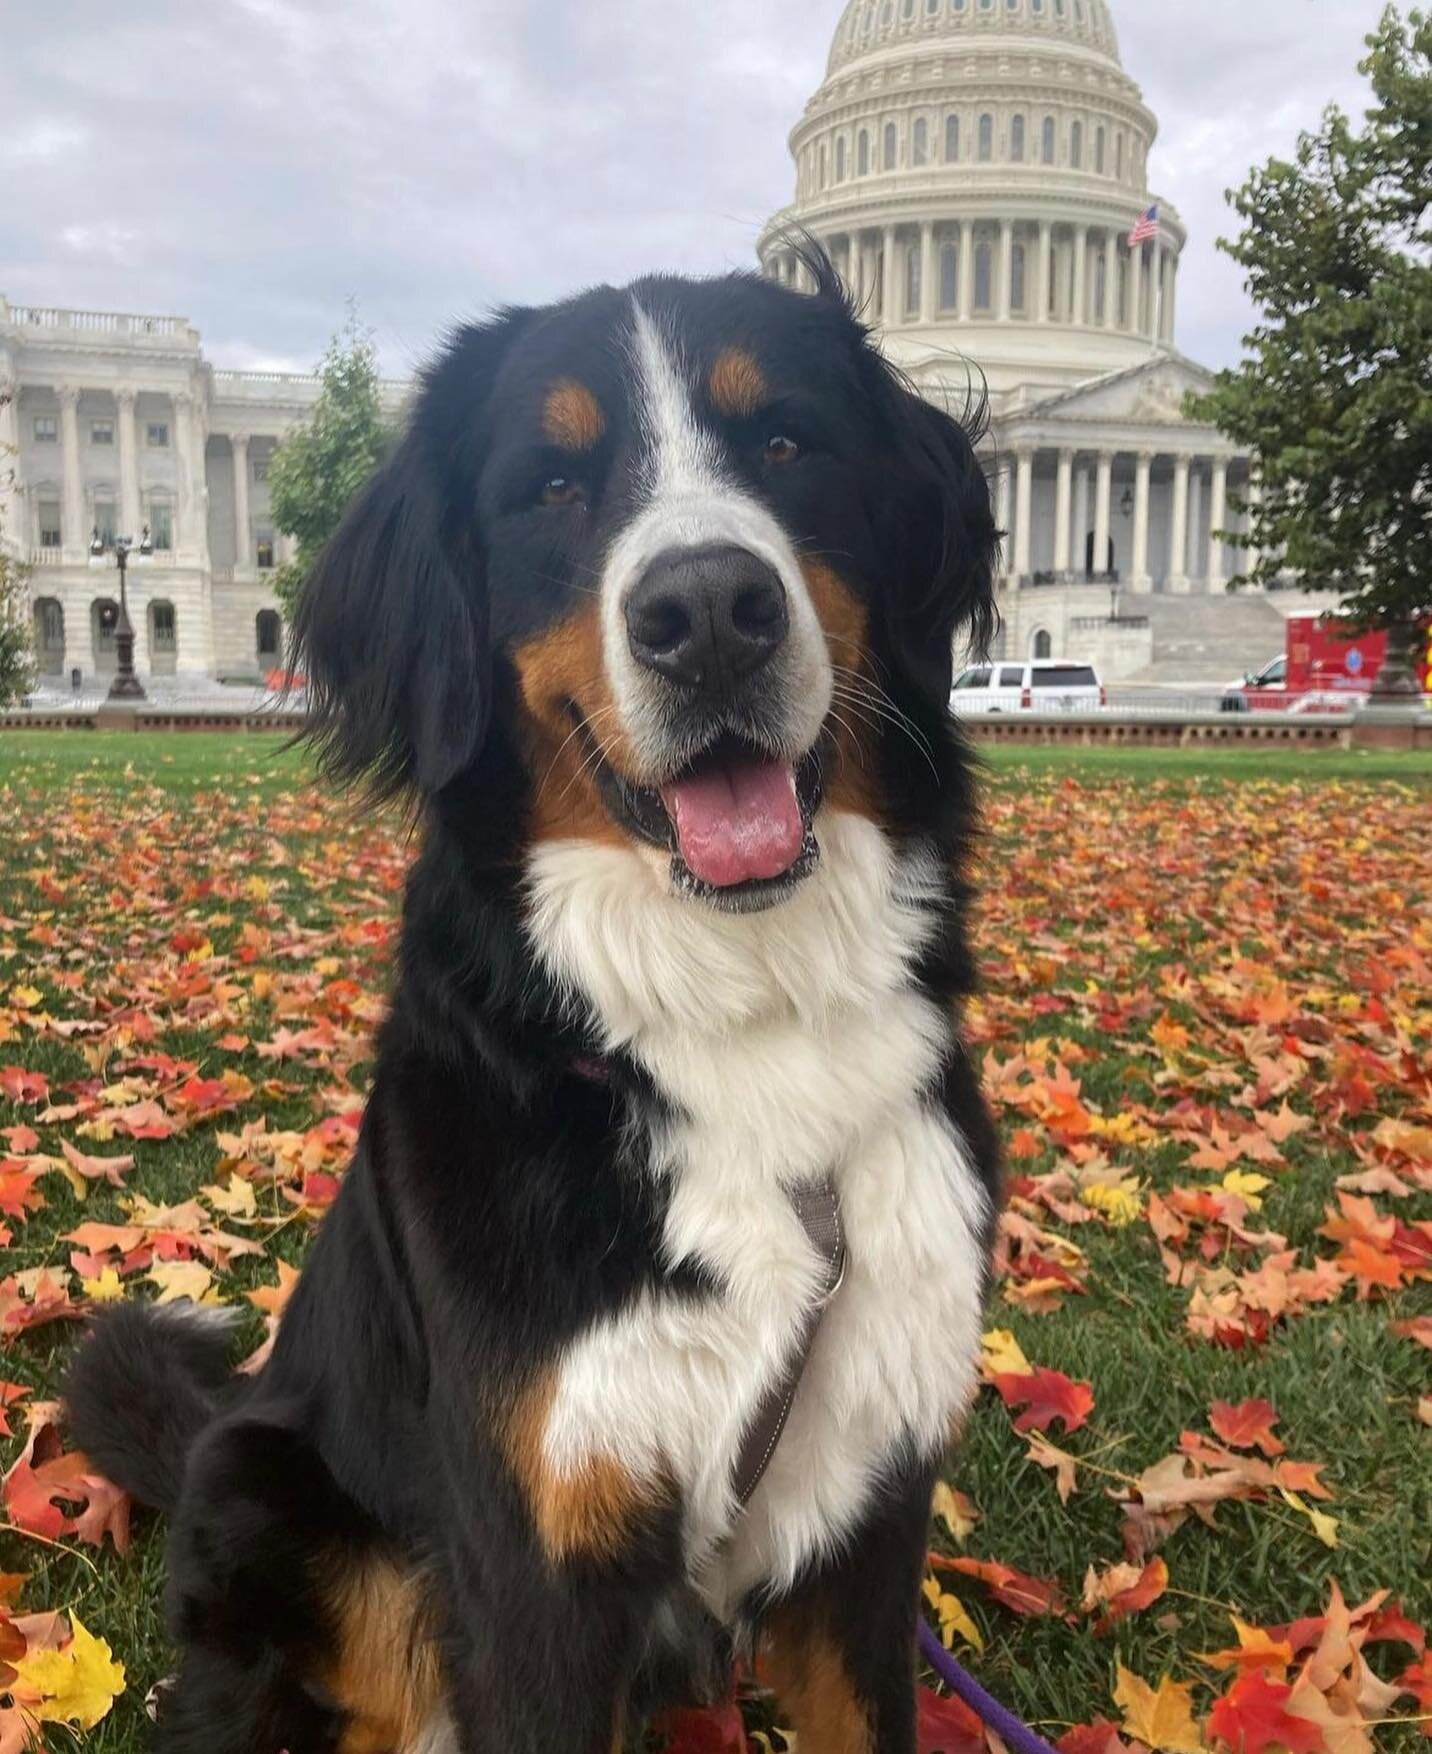 Can&rsquo;t fight that fall feeling! 🍁 📷 @dollythedoggyy from the #DCDogMoms feed